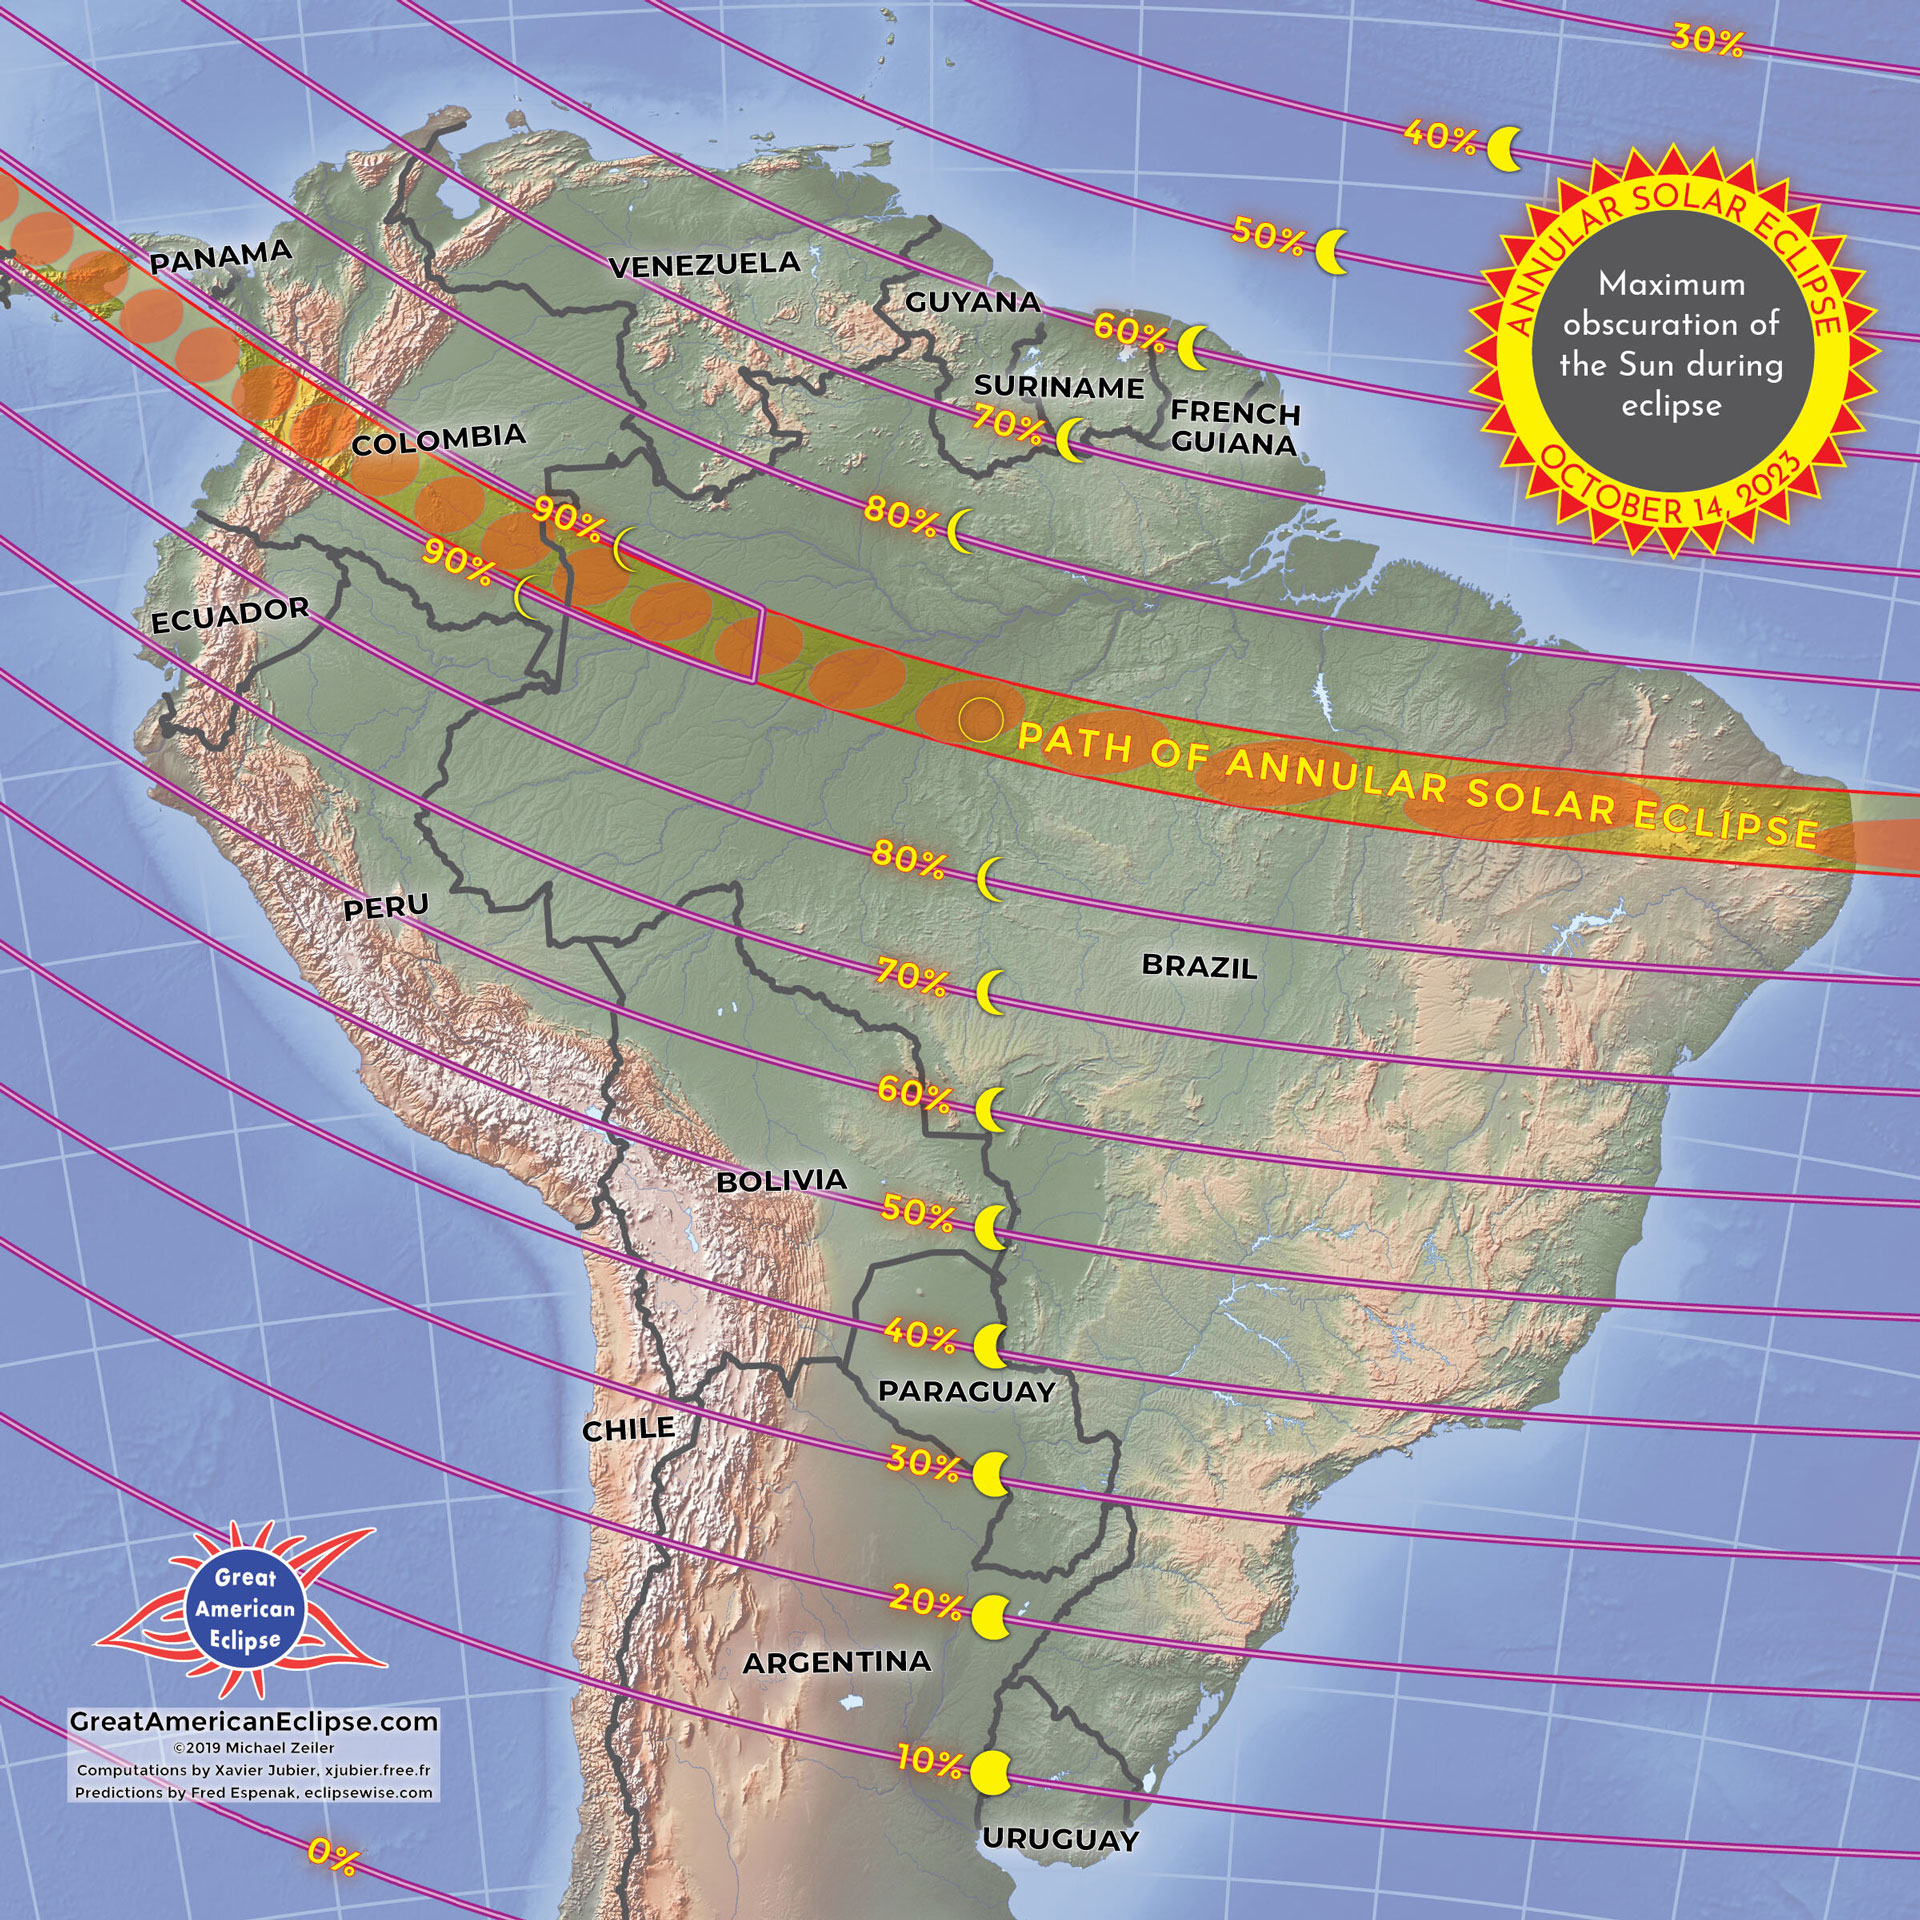 Map of a portion of South America showing the path of the annular solar eclipse.